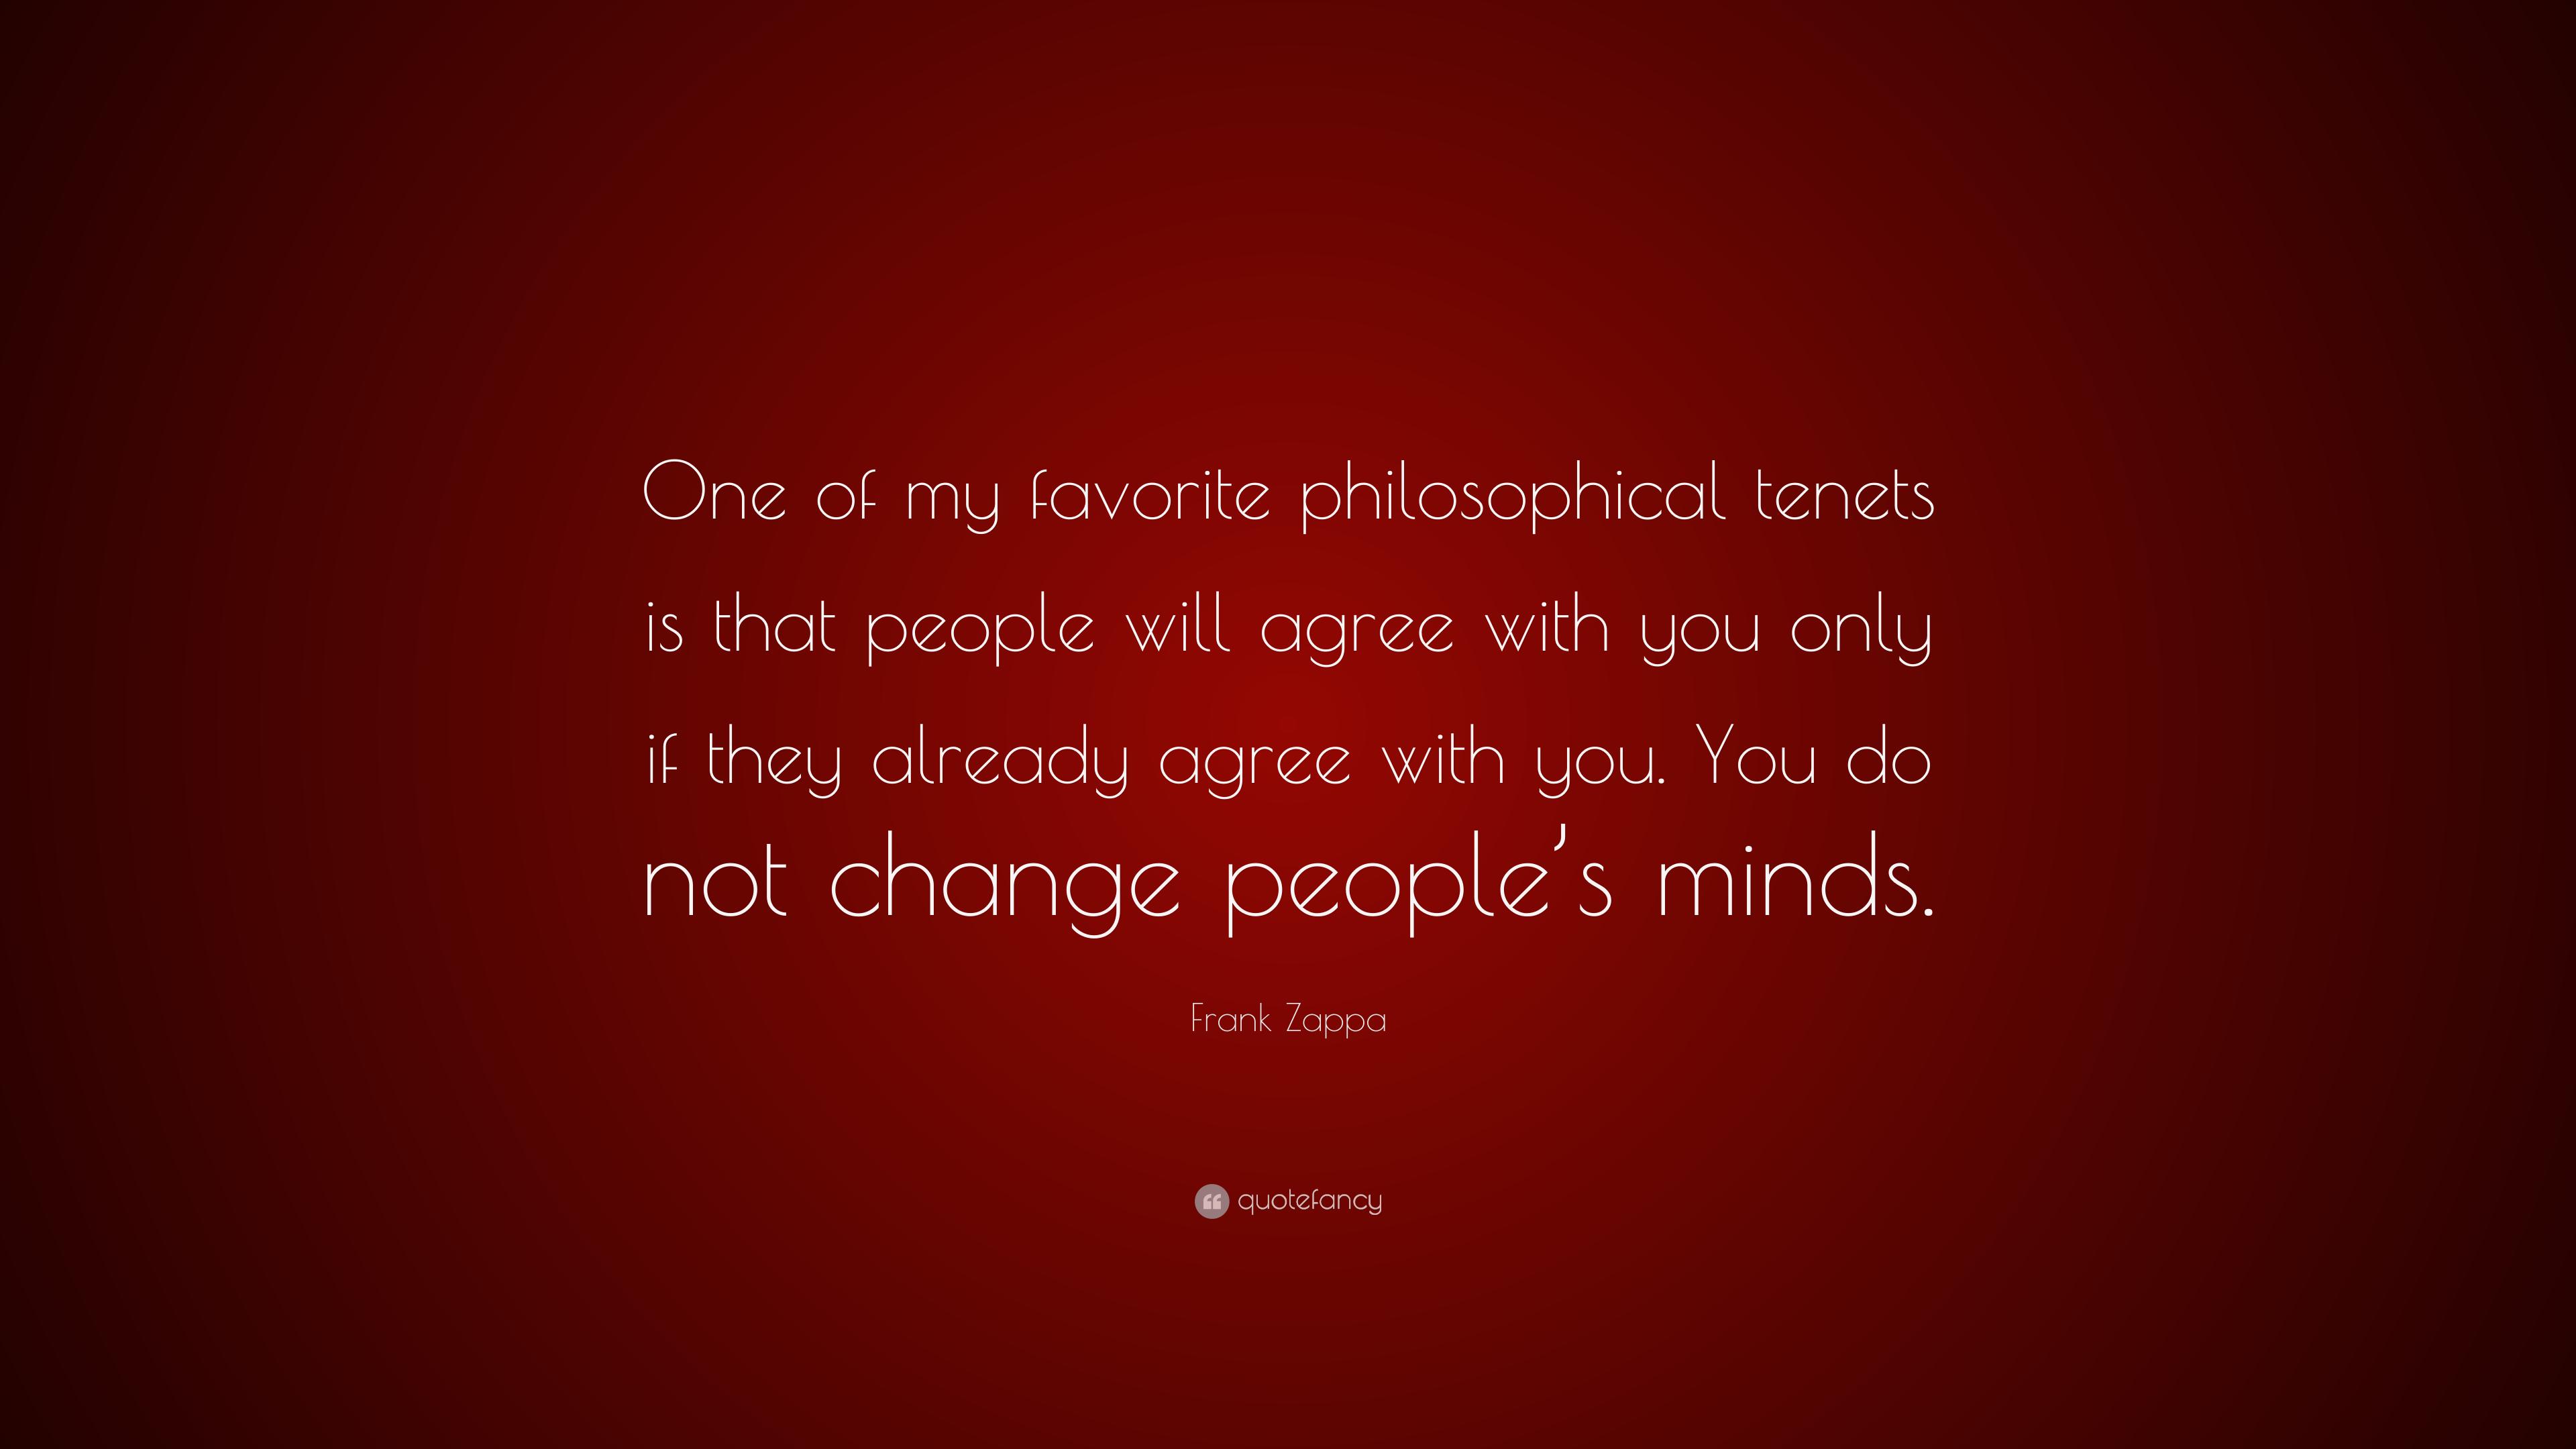 Frank Zappa Quote: “One of my favorite philosophical tenets